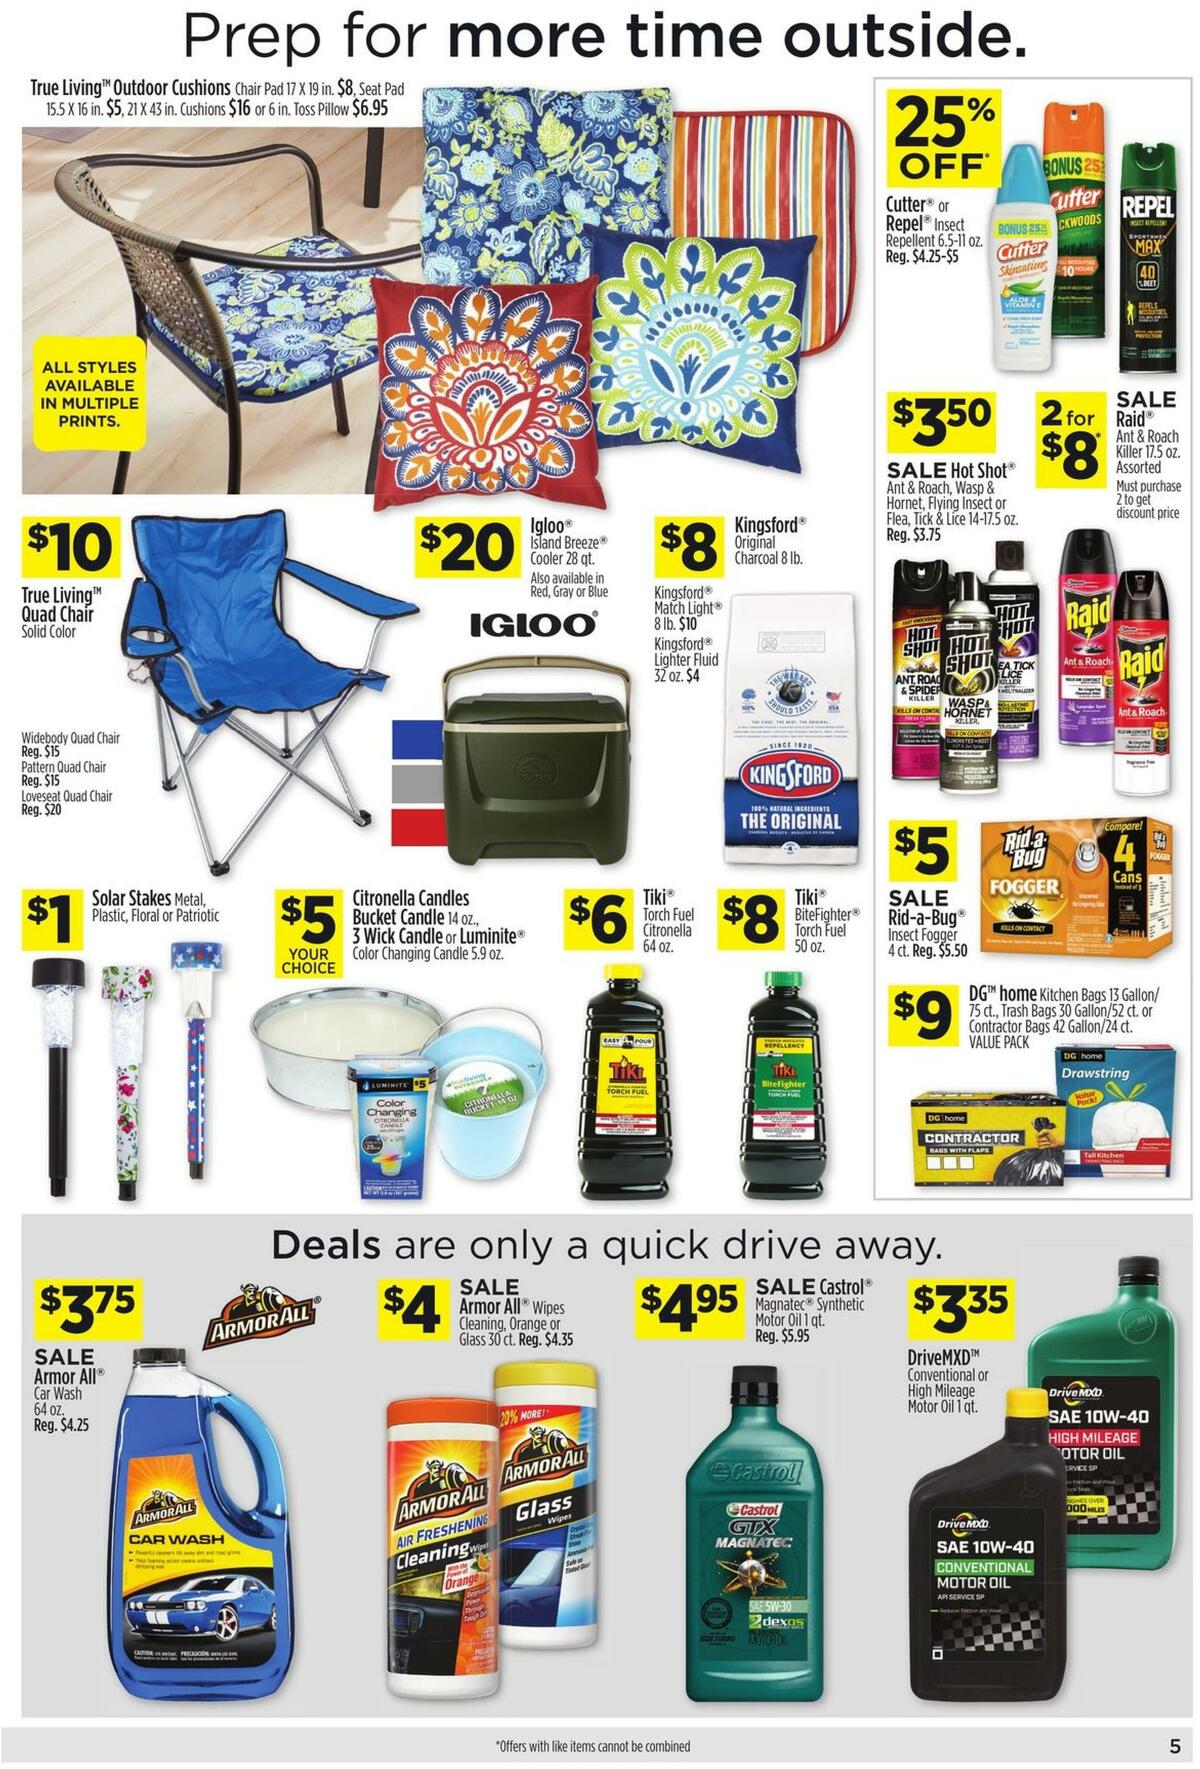 Dollar General Weekly Ad from May 9